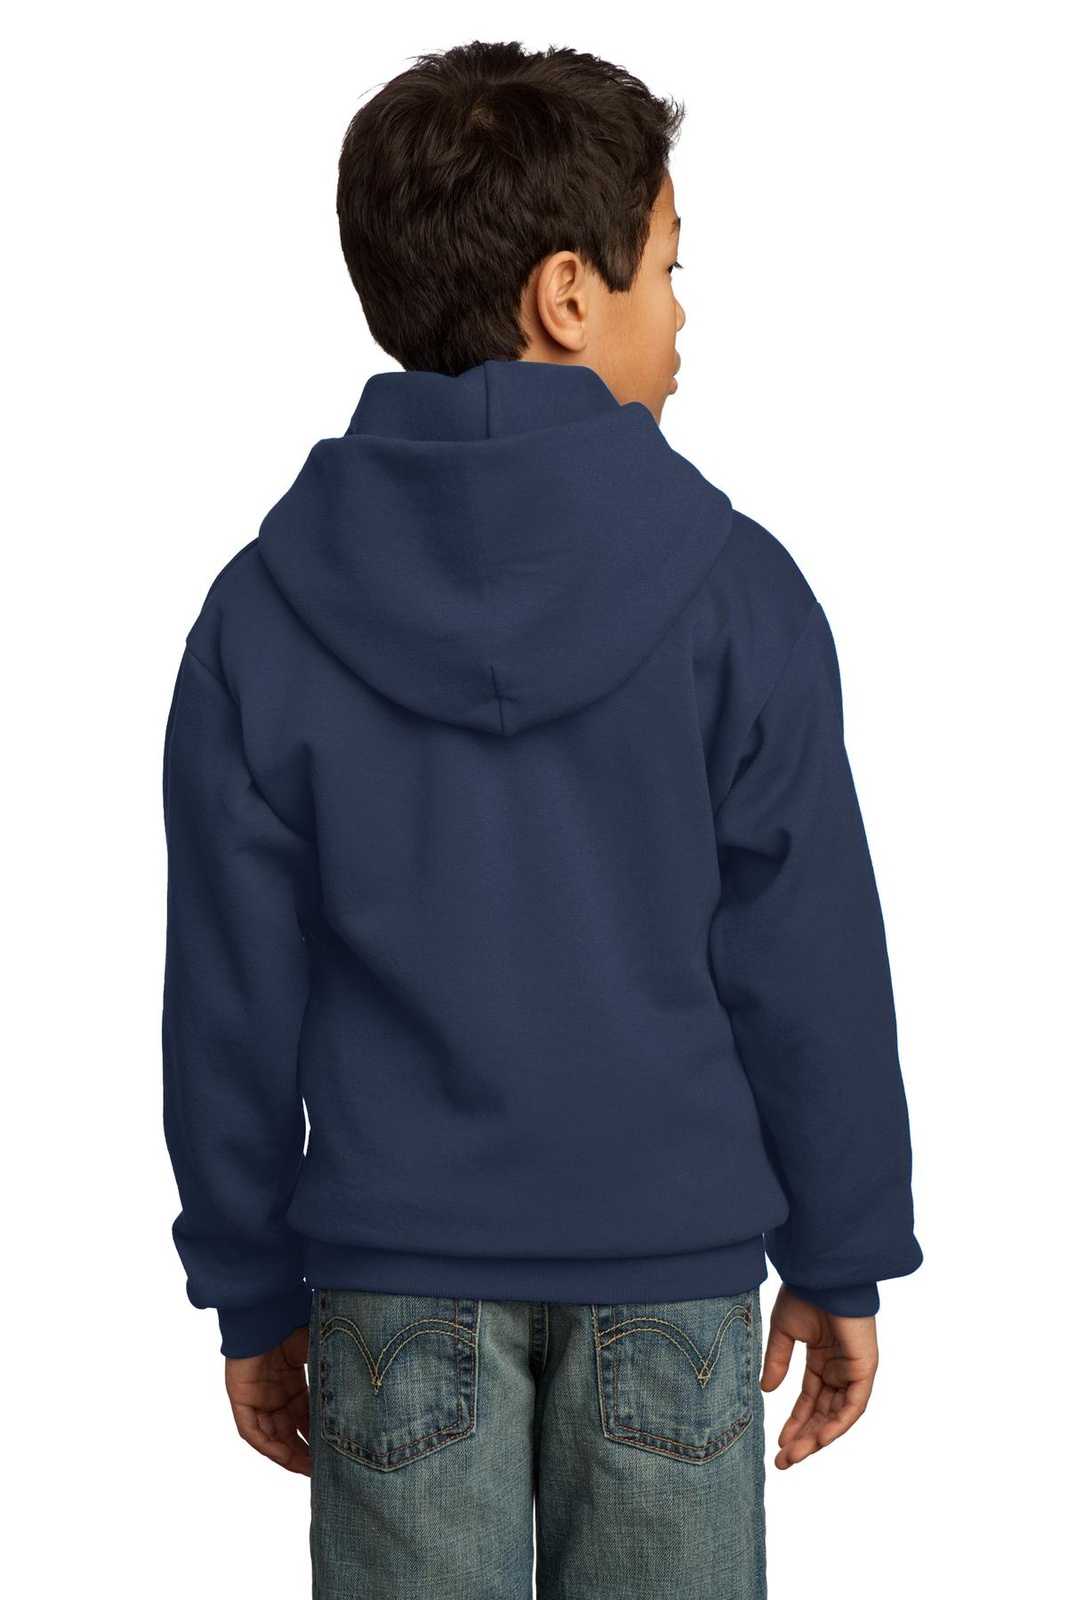 Port & Company PC90YH Youth Core Fleece Pullover Hooded Sweatshirt - Navy - HIT a Double - 1